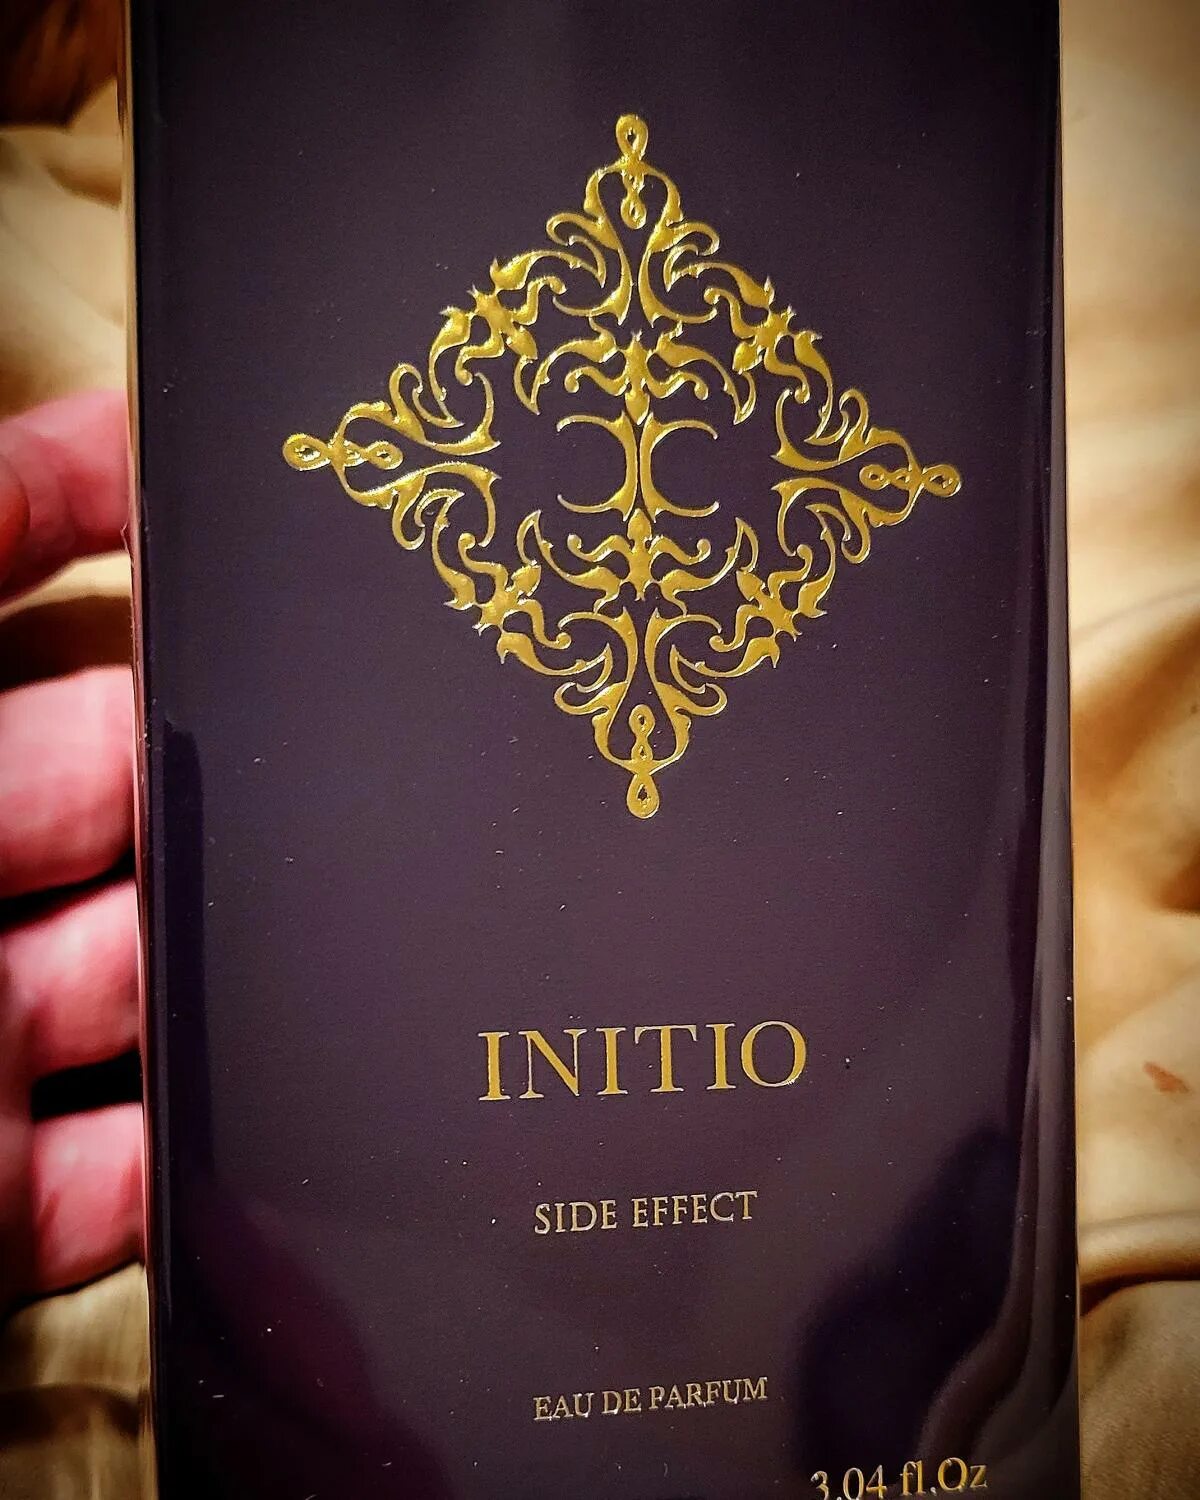 Prives side effect. Side Effect Initio Parfums prives. Initio Side Effect духи. Side Effect - Initio Parfums prives (Уни). Atomic Rose Initio Parfums prives.